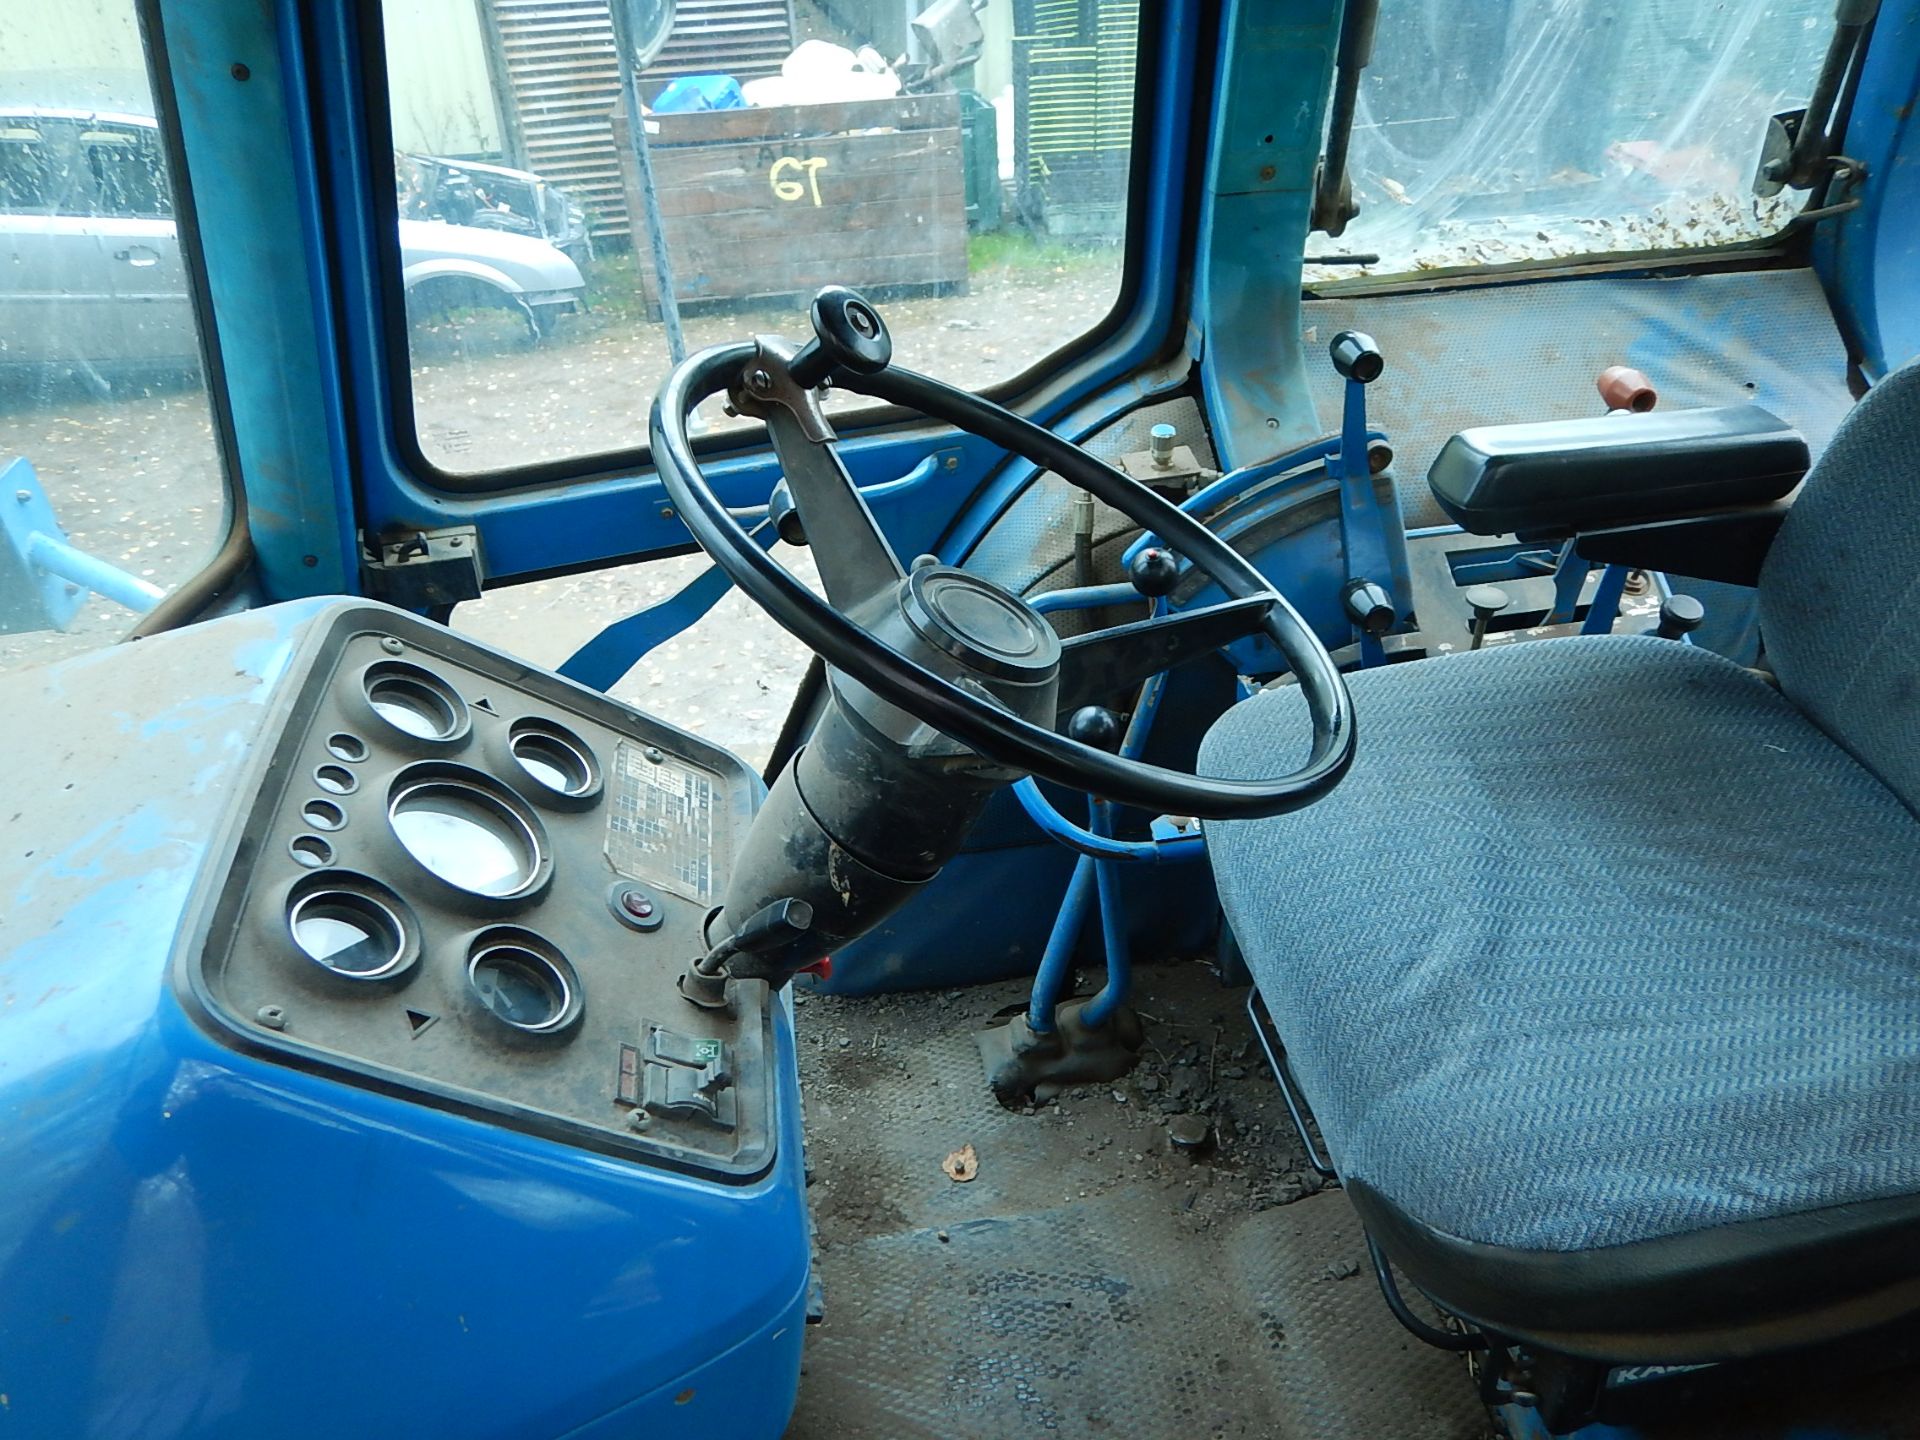 1985 FORD TW-25 4wd TRACTOR Fitted with front underslung weight, rear inside wheel weights, Q cab - Image 5 of 12